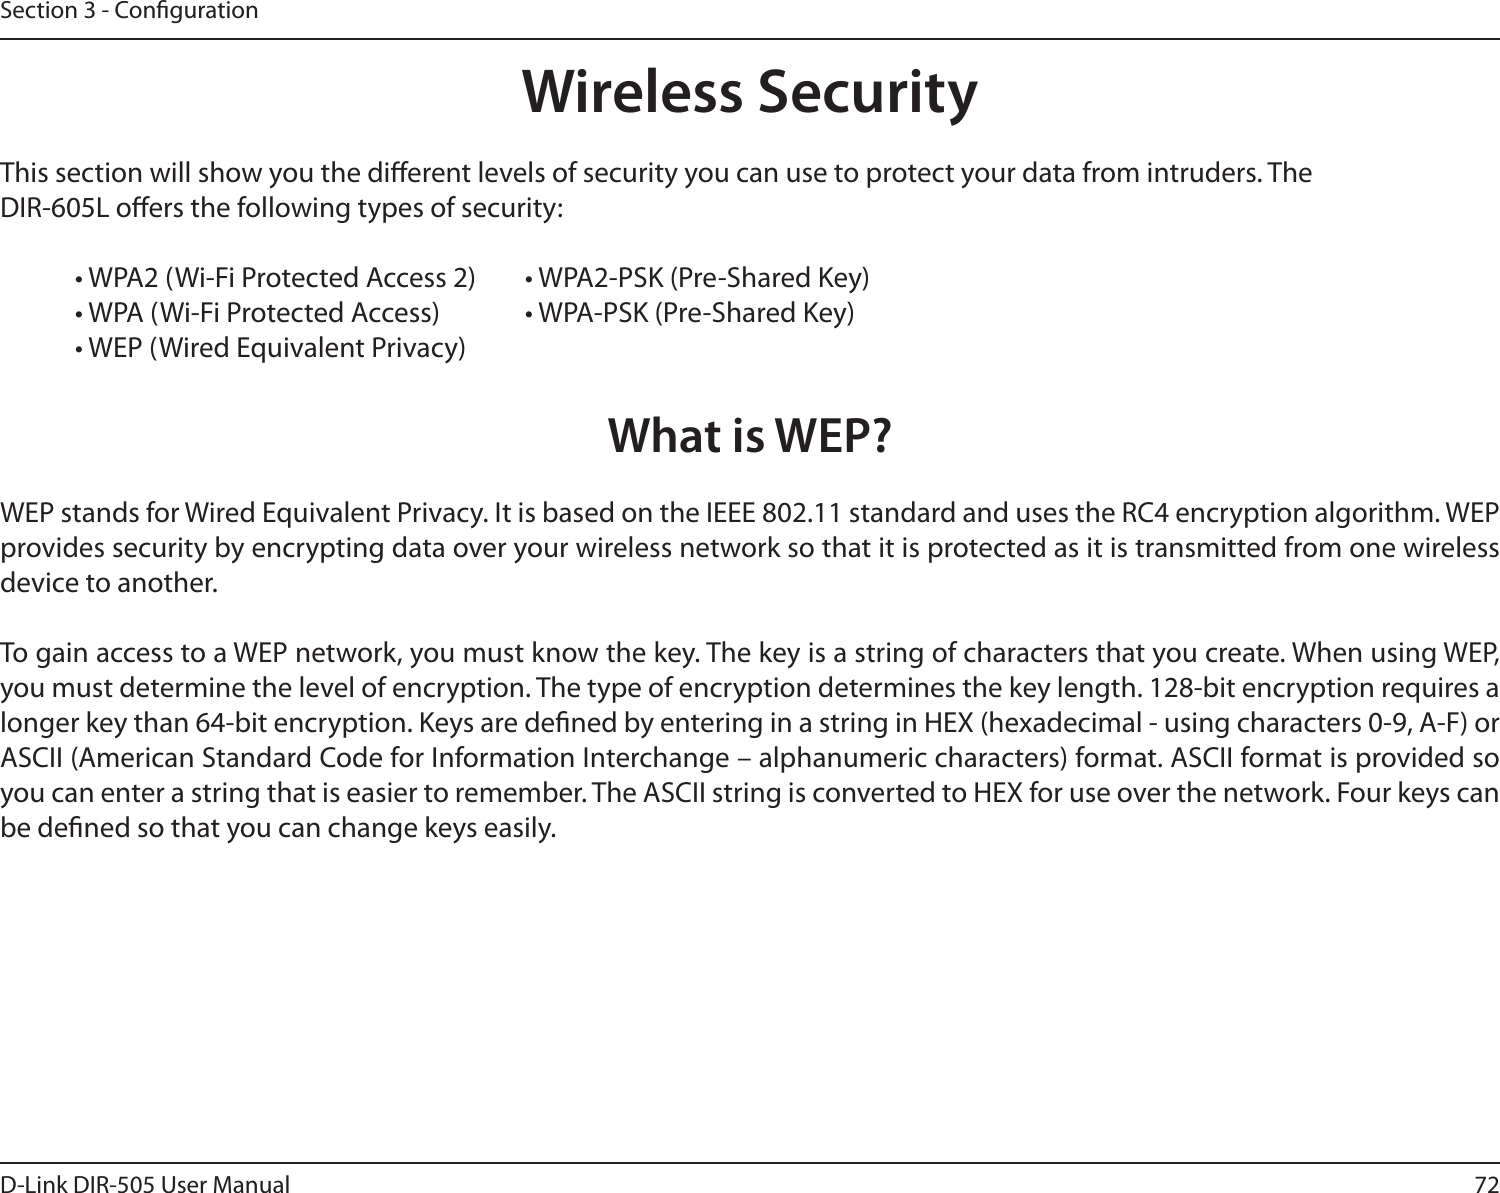 72D-Link DIR-505 User ManualSection 3 - CongurationWireless SecurityThis section will show you the dierent levels of security you can use to protect your data from intruders. TheDIR-605L oers the following types of security:  • WPA2 (Wi-Fi Protected Access 2)   • WPA2-PSK (Pre-Shared Key)  • WPA (Wi-Fi Protected Access)   • WPA-PSK (Pre-Shared Key)  • WEP (Wired Equivalent Privacy)What is WEP?WEP stands for Wired Equivalent Privacy. It is based on the IEEE 802.11 standard and uses the RC4 encryption algorithm. WEPprovides security by encrypting data over your wireless network so that it is protected as it is transmitted from one wireless device to another.To gain access to a WEP network, you must know the key. The key is a string of characters that you create. When using WEP, you must determine the level of encryption. The type of encryption determines the key length. 128-bit encryption requires alonger key than 64-bit encryption. Keys are dened by entering in a string in HEX (hexadecimal - using characters 0-9, A-F) or ASCII (American Standard Code for Information Interchange – alphanumeric characters) format. ASCII format is provided so you can enter a string that is easier to remember. The ASCII string is converted to HEX for use over the network. Four keys can be dened so that you can change keys easily.